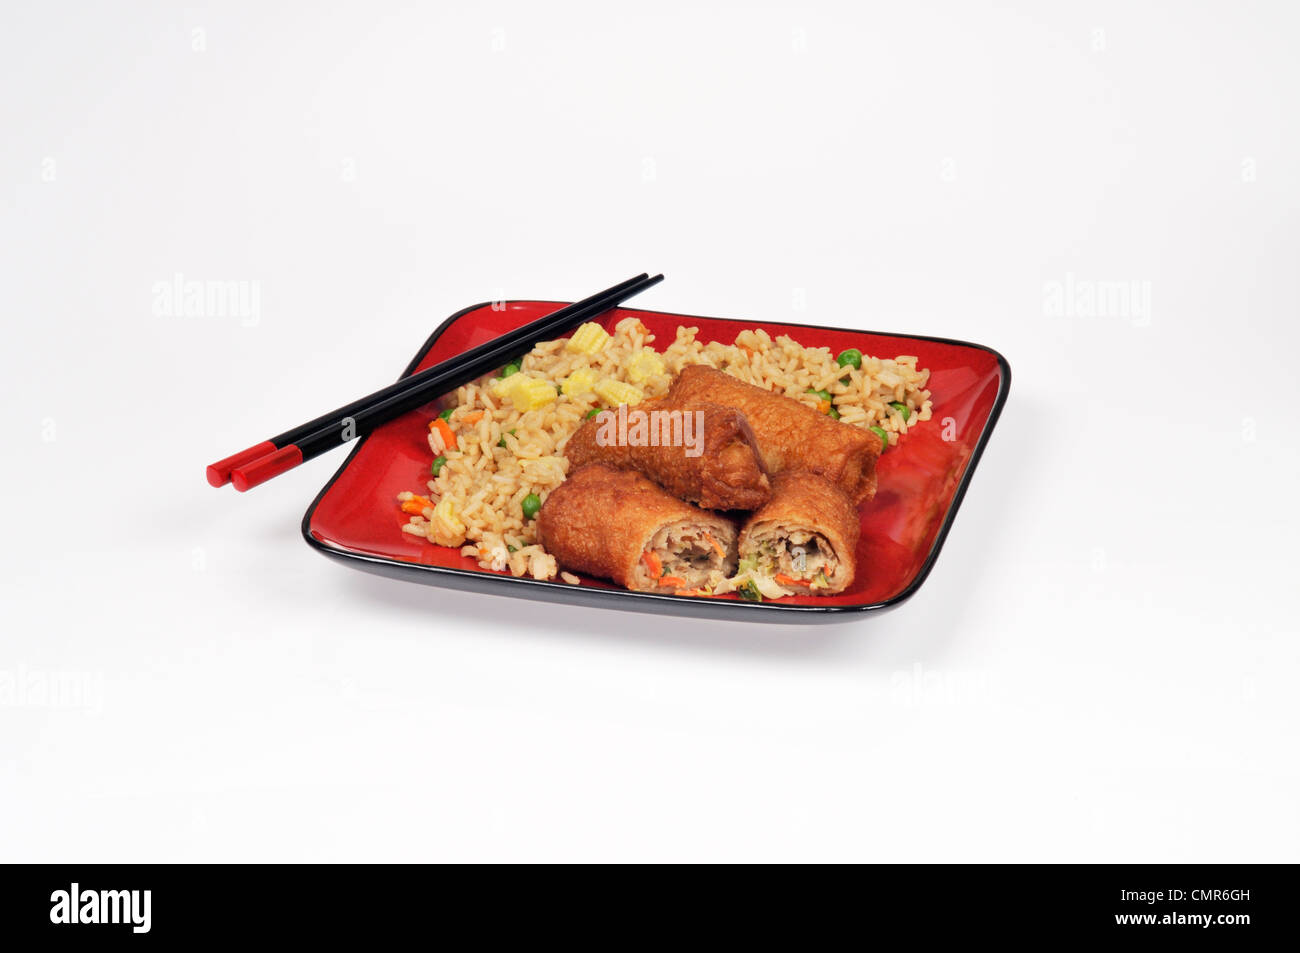 Shrimp fried rice and pork egg rolls meal on red plate with chopsticks Stock Photo